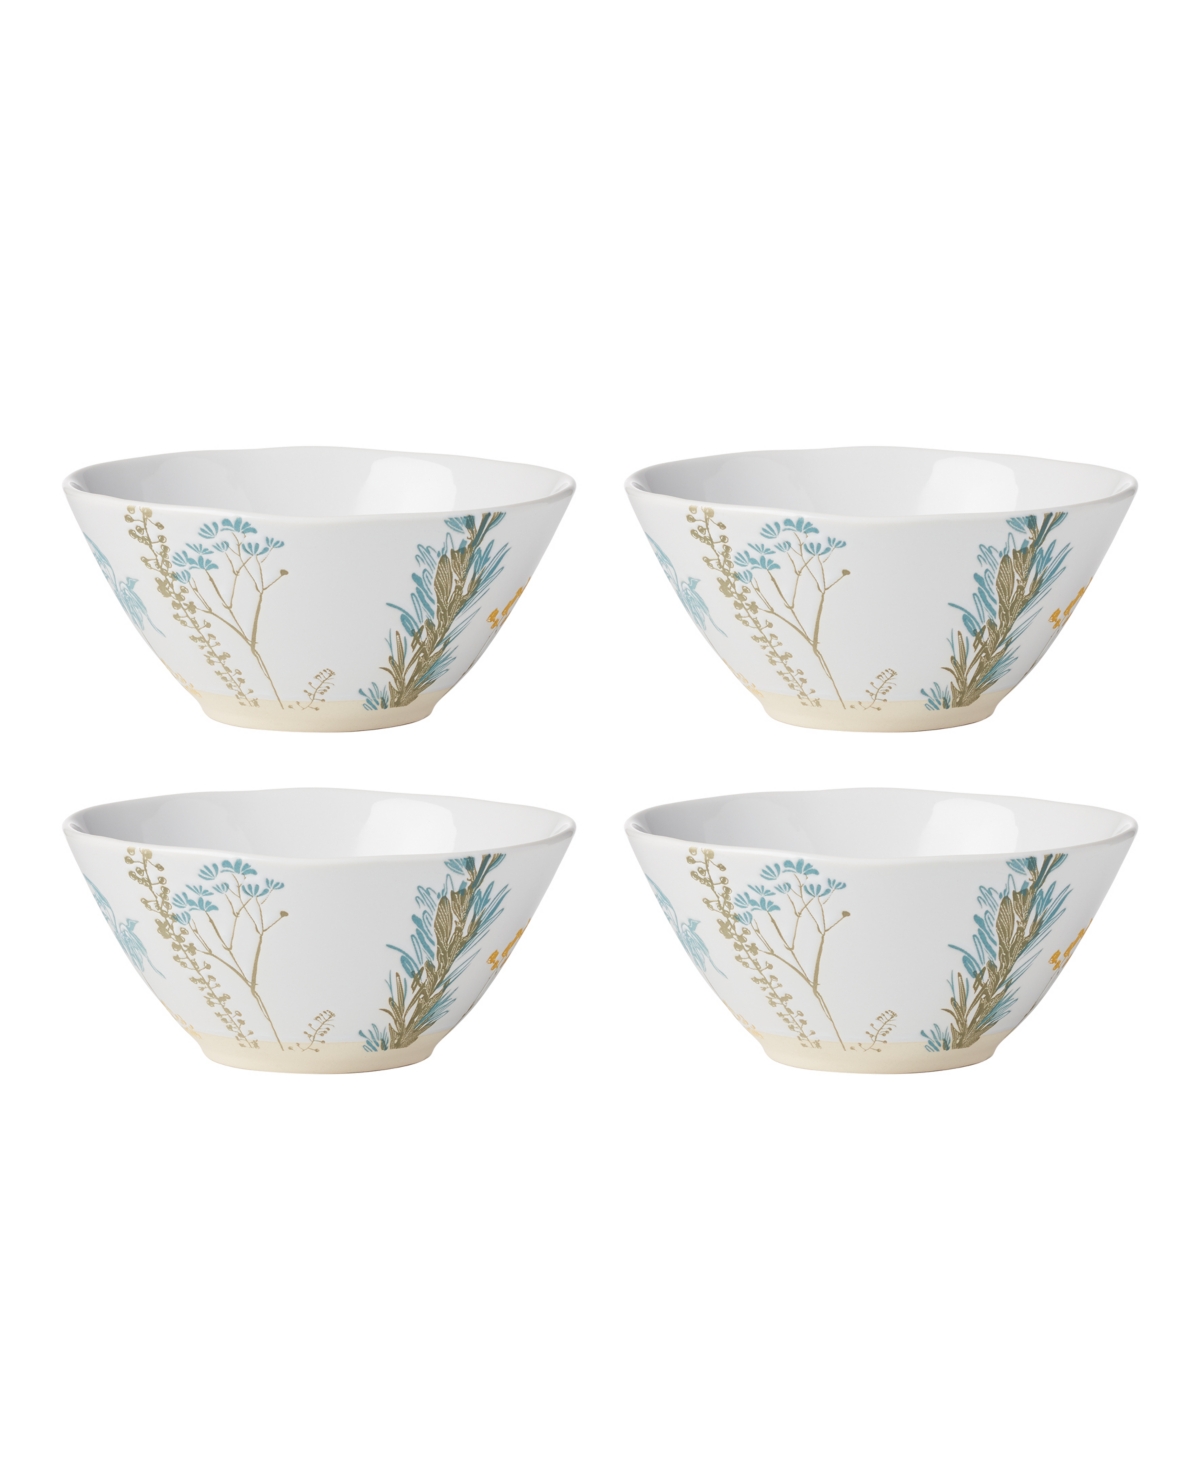 Wildflowers All-Purpose Bowls, Set of 4 - White